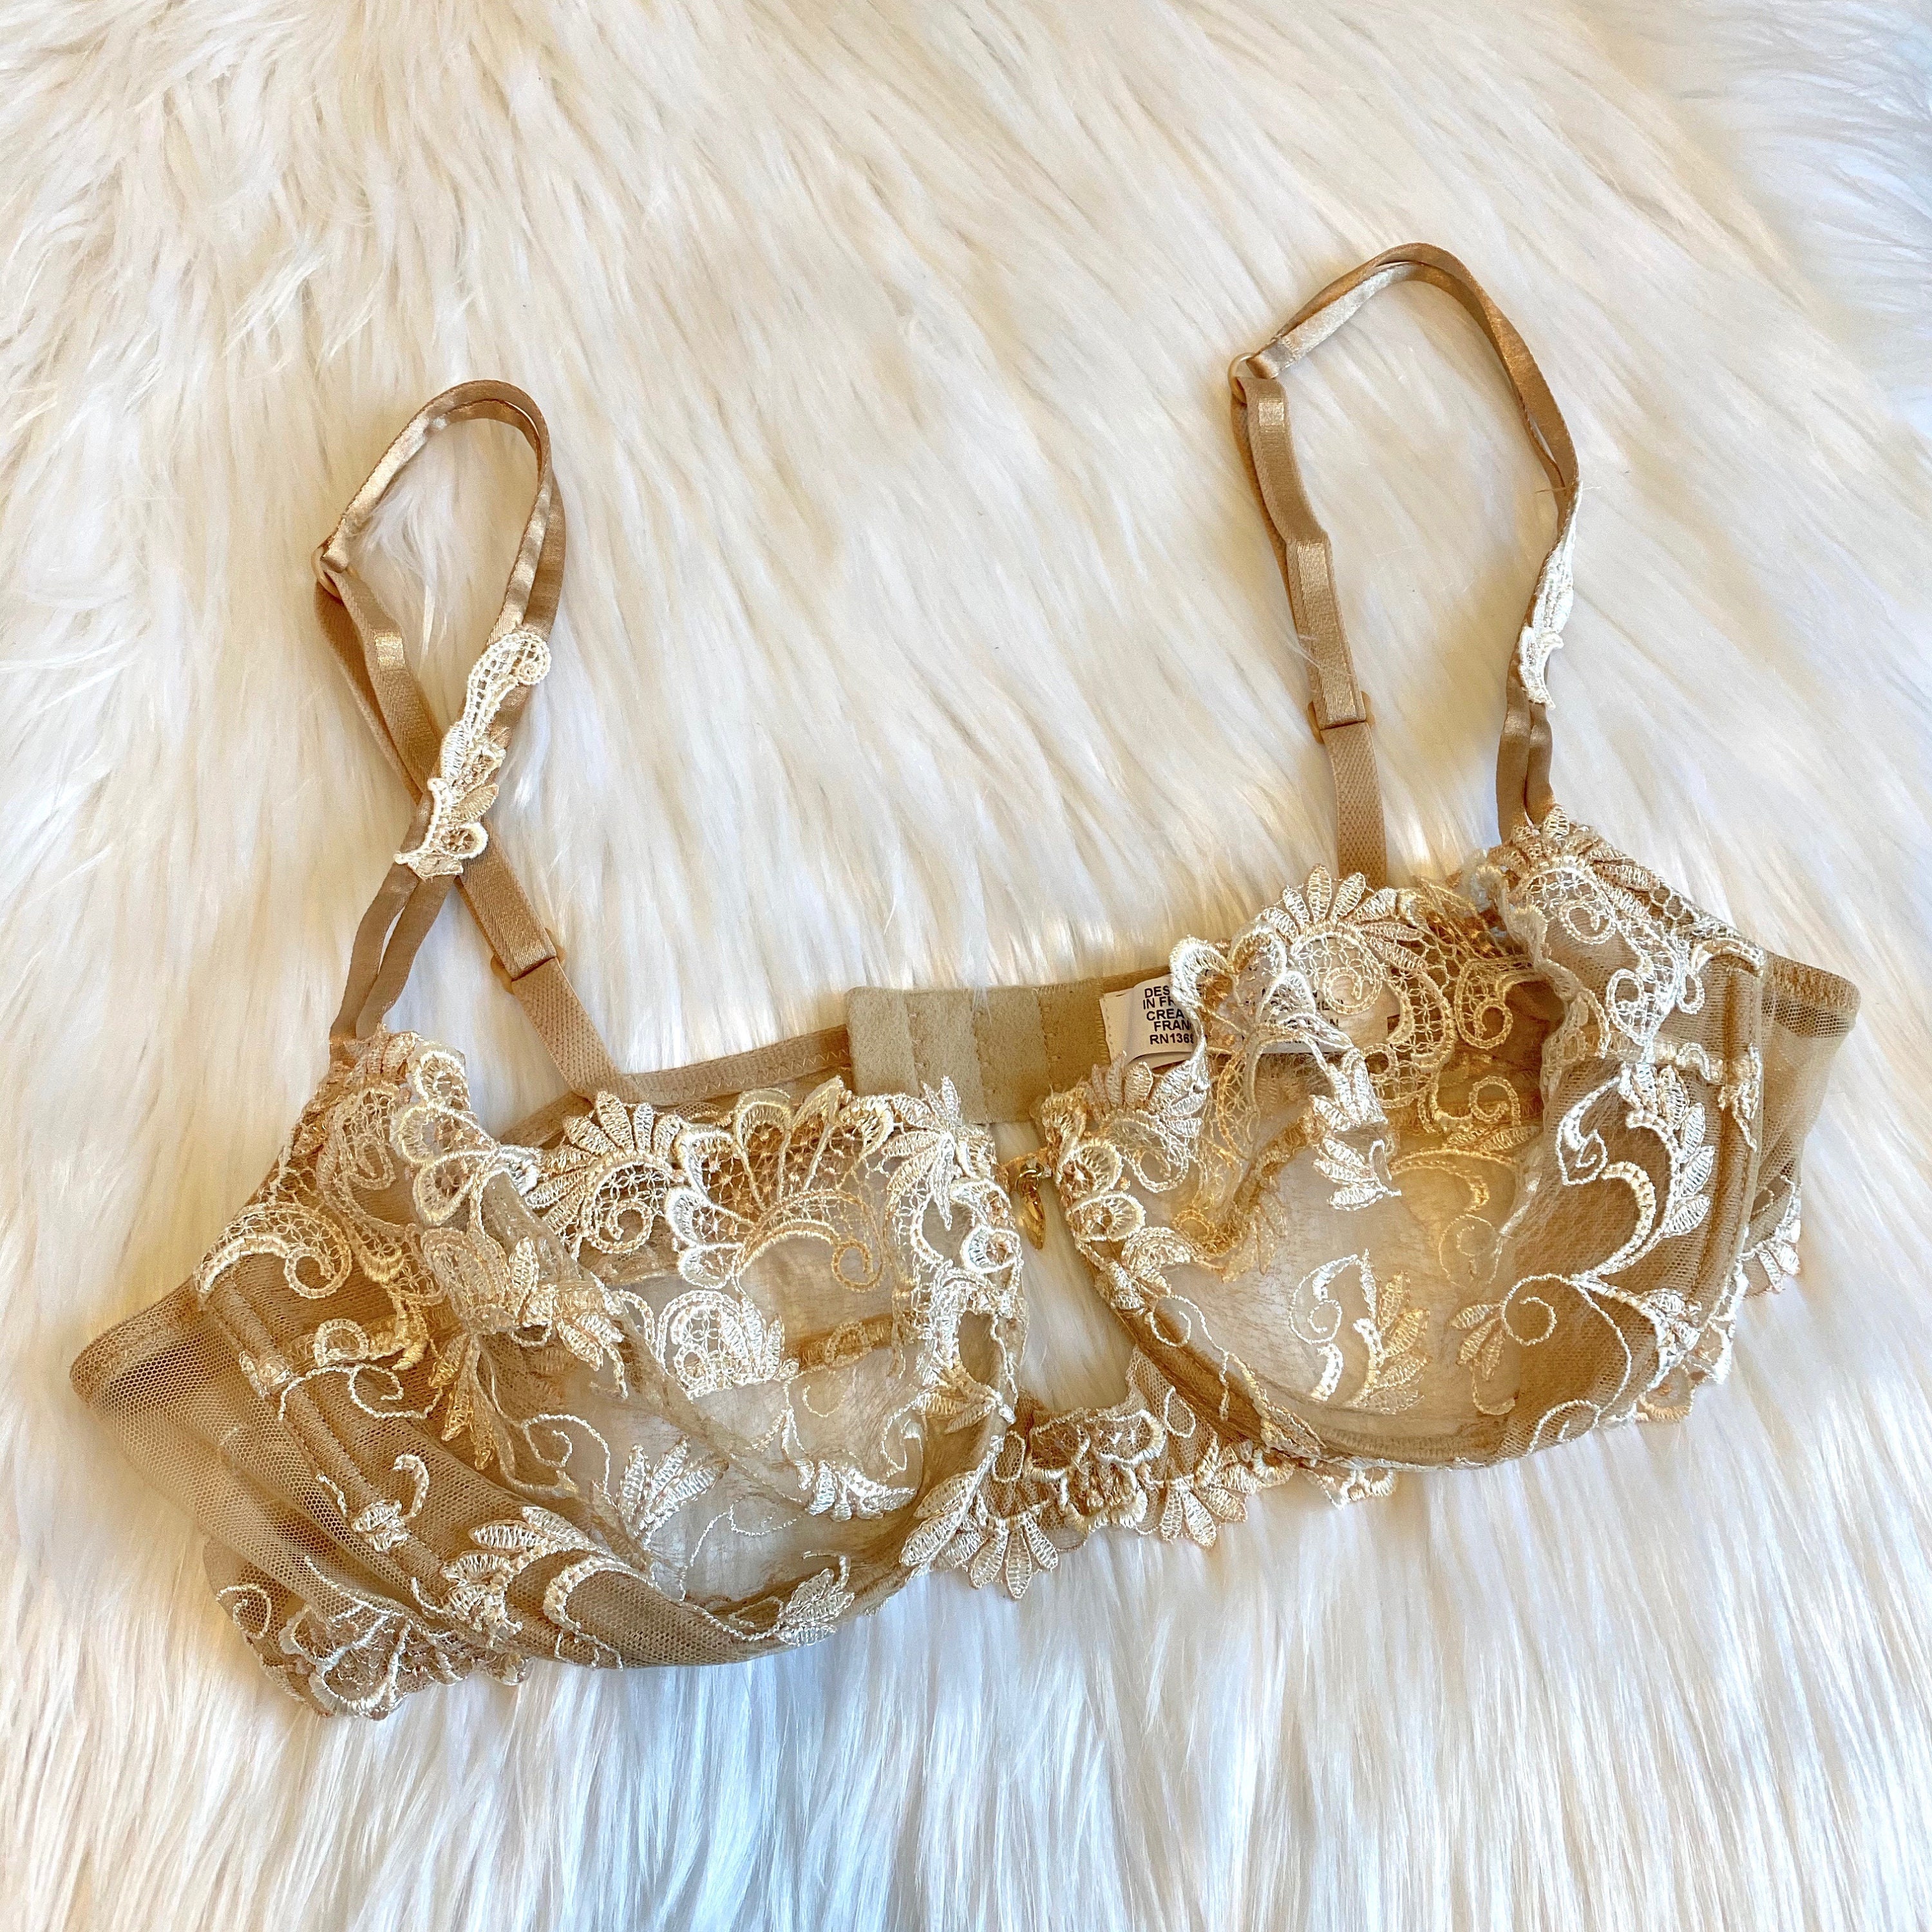 Vintage Lise Charmel Nude Lace Bra, French Made and Designed Women's  Lingerie, Embroidered Adjustable Bras 